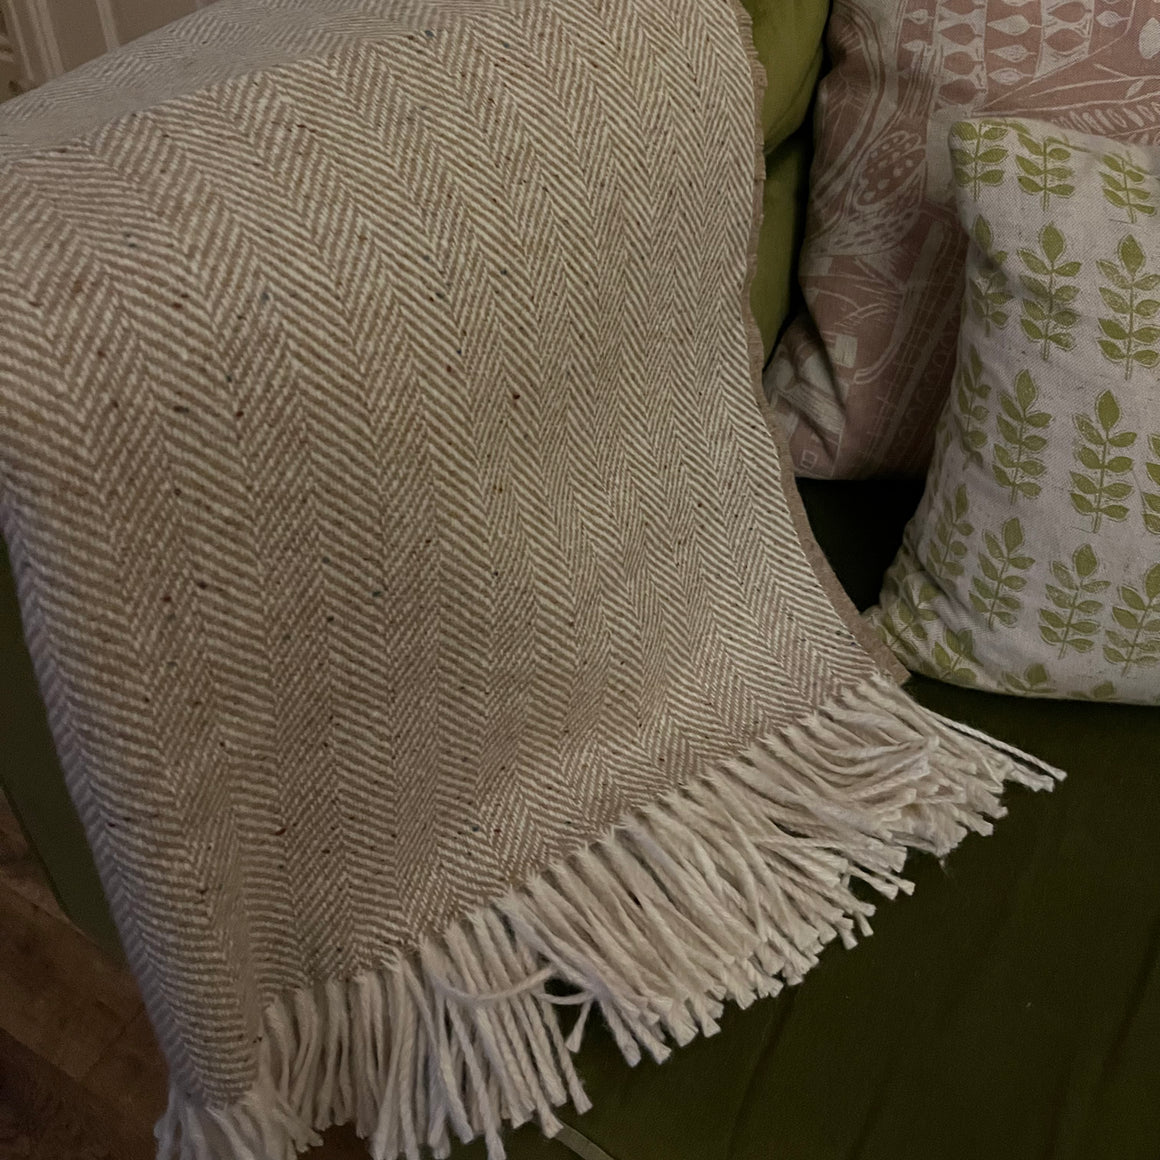 WOVEN WOOL BLANKETS - FOUR DESIGNS